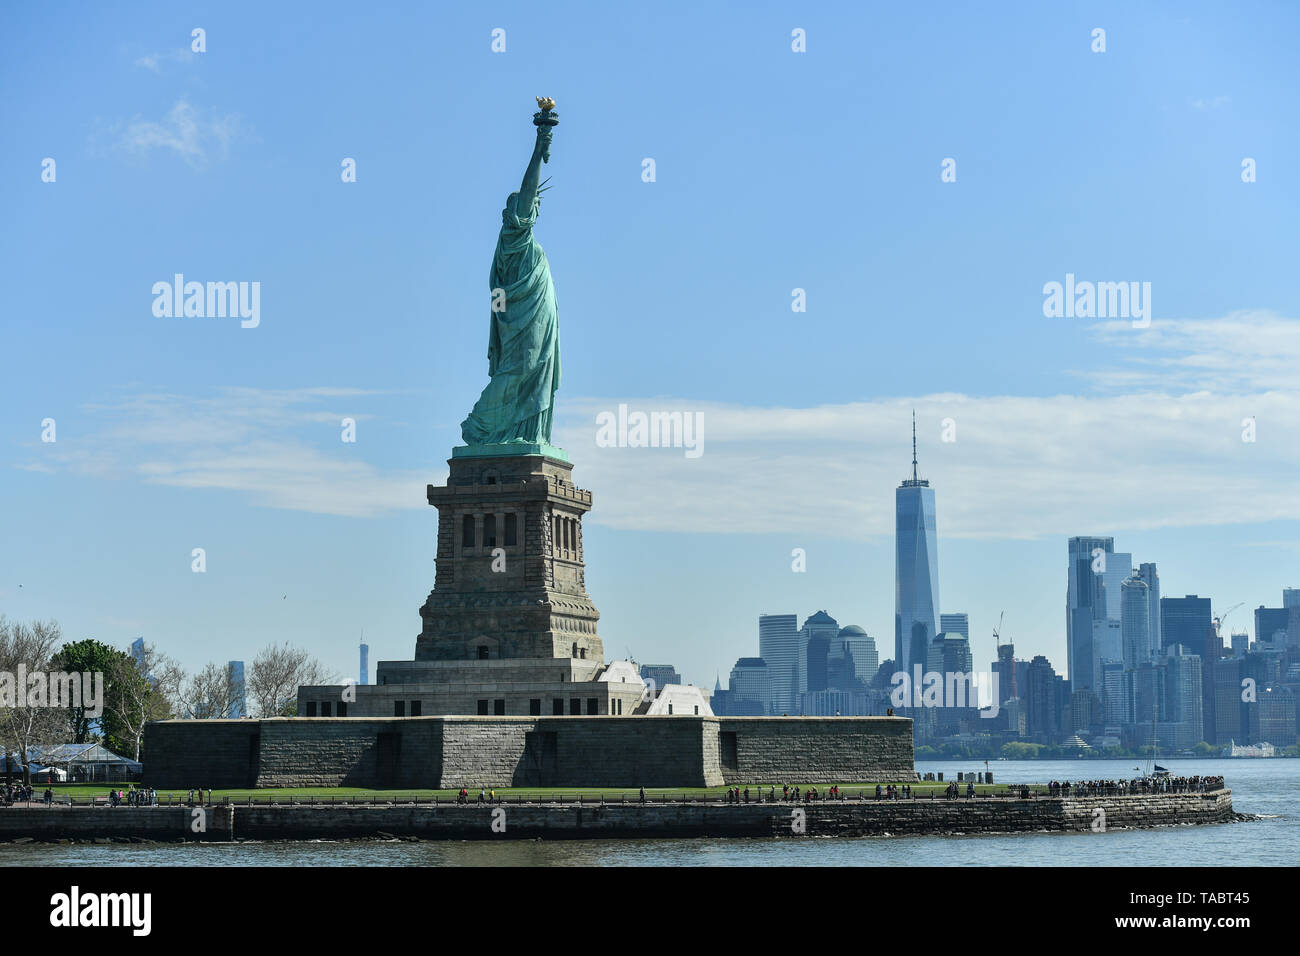 A view of the Statue of Liberty and New York skyline on May 16, 2019 in New York City. Stock Photo